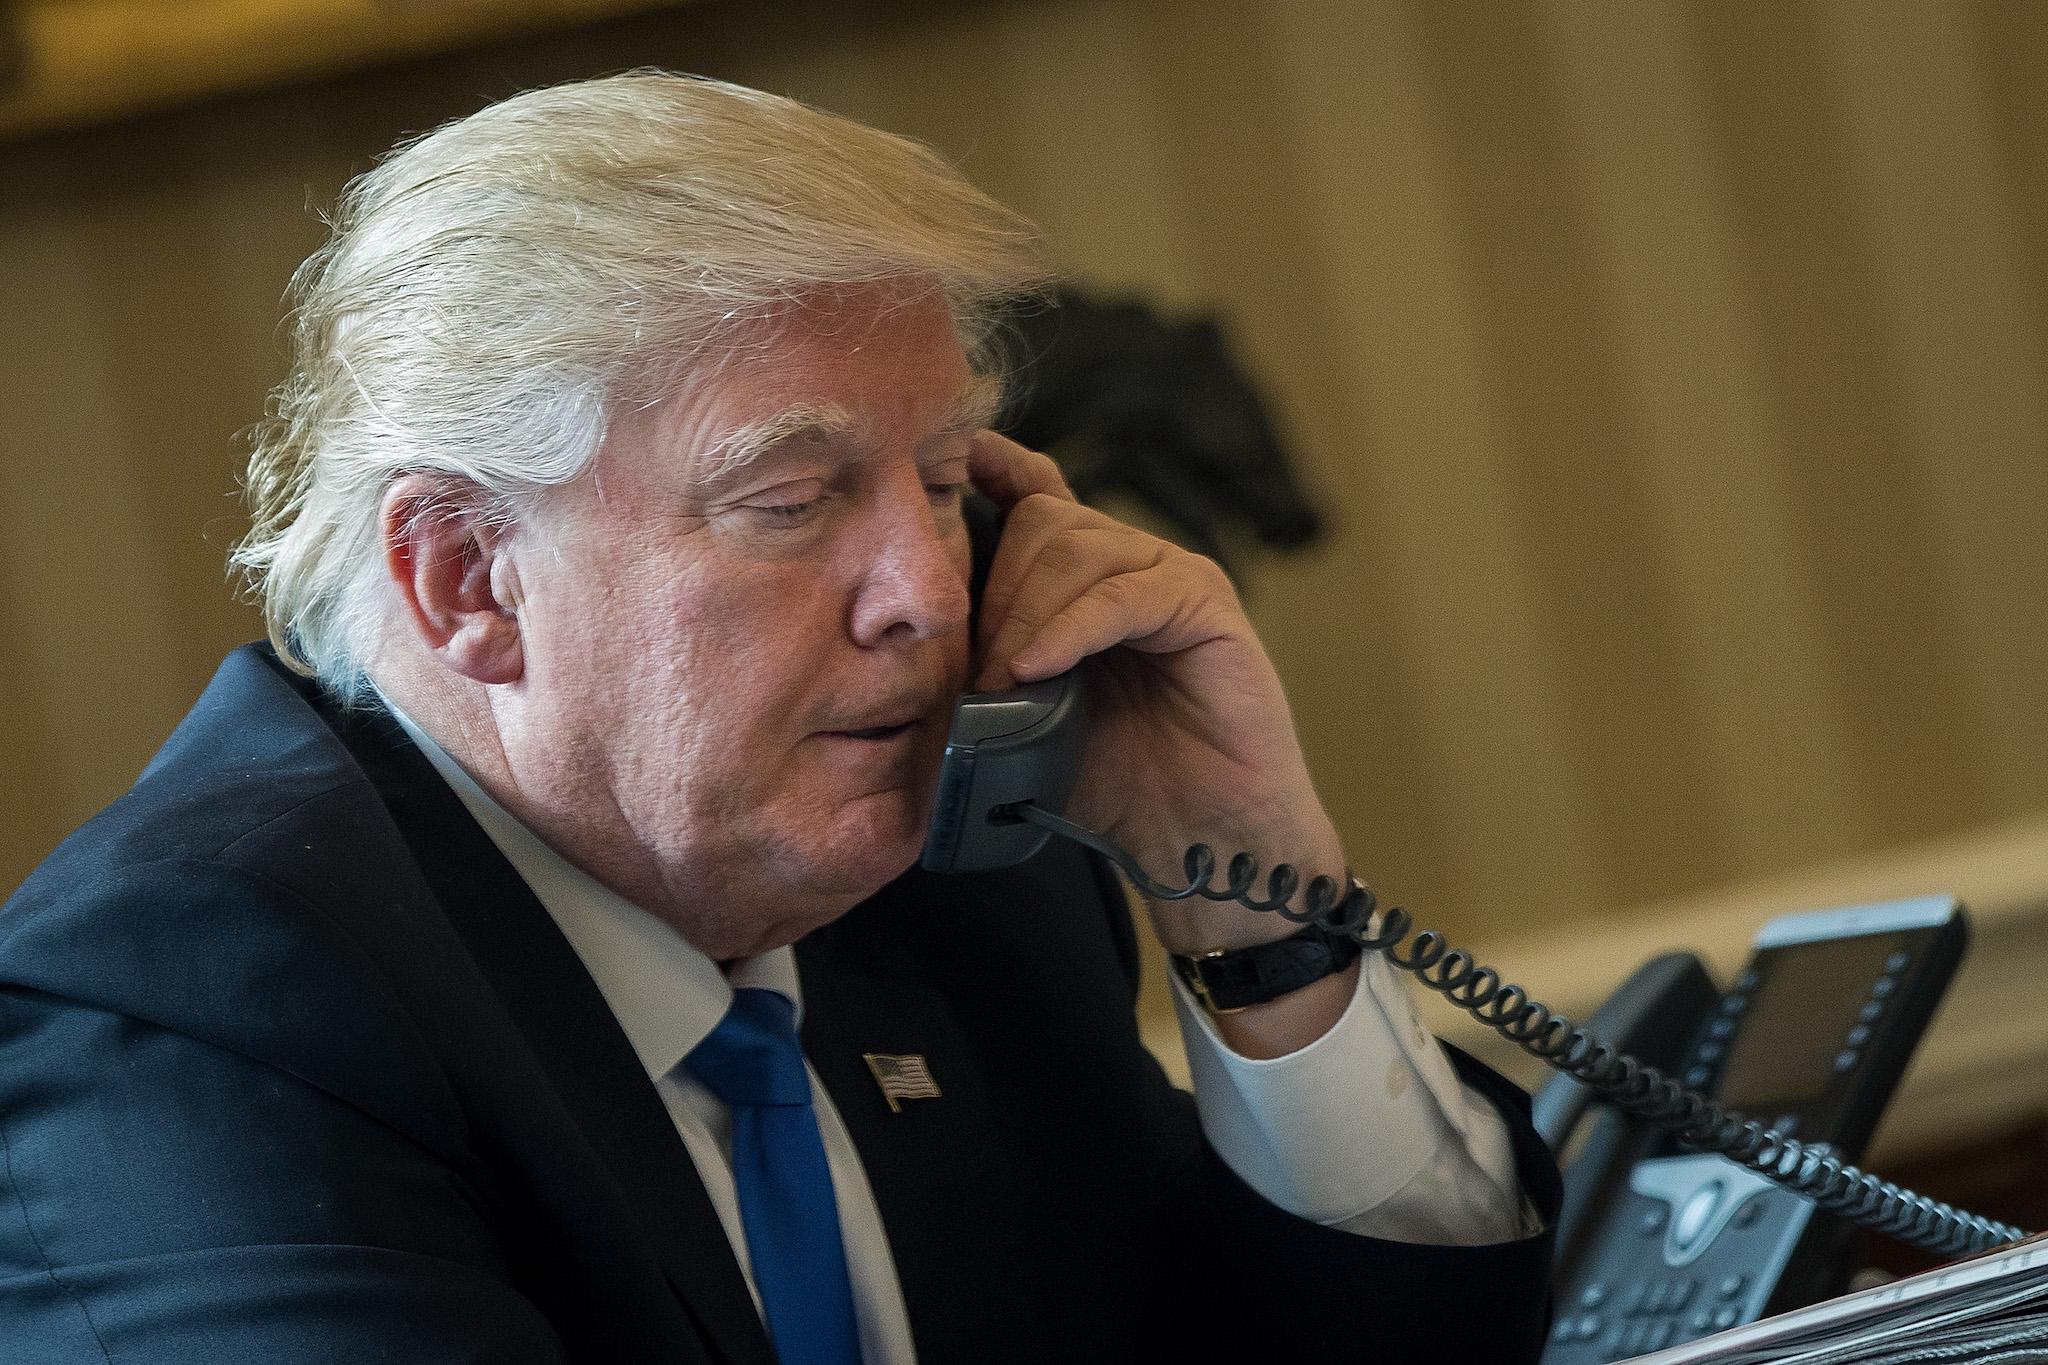 The President speaks to Putin over the phone in January, just days after taking office